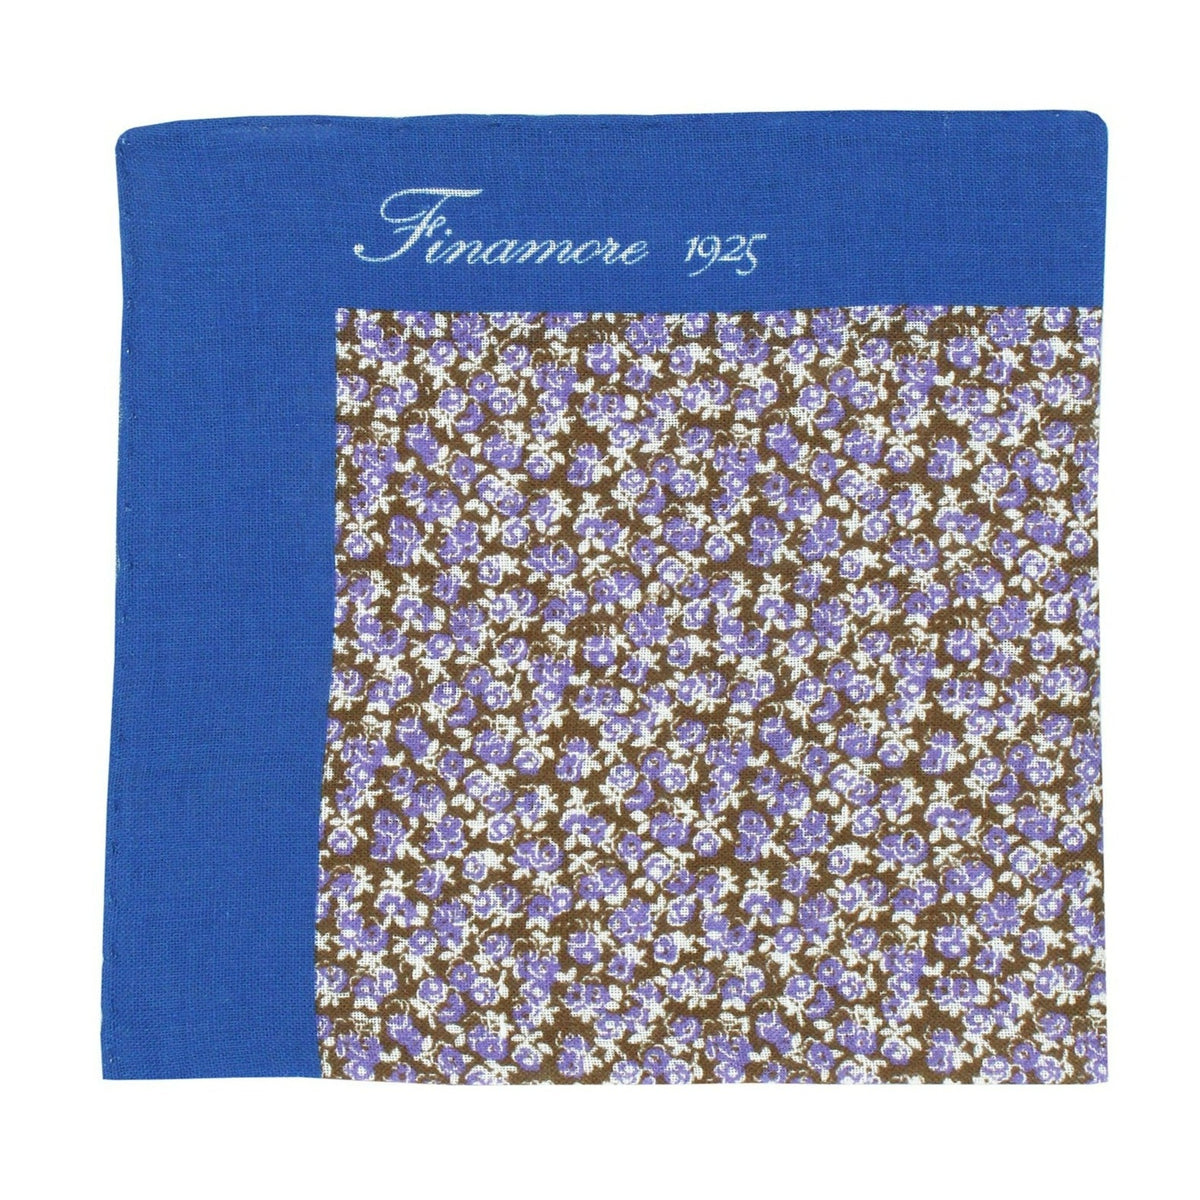 Linen pocket square brown lilac flower background with blue border